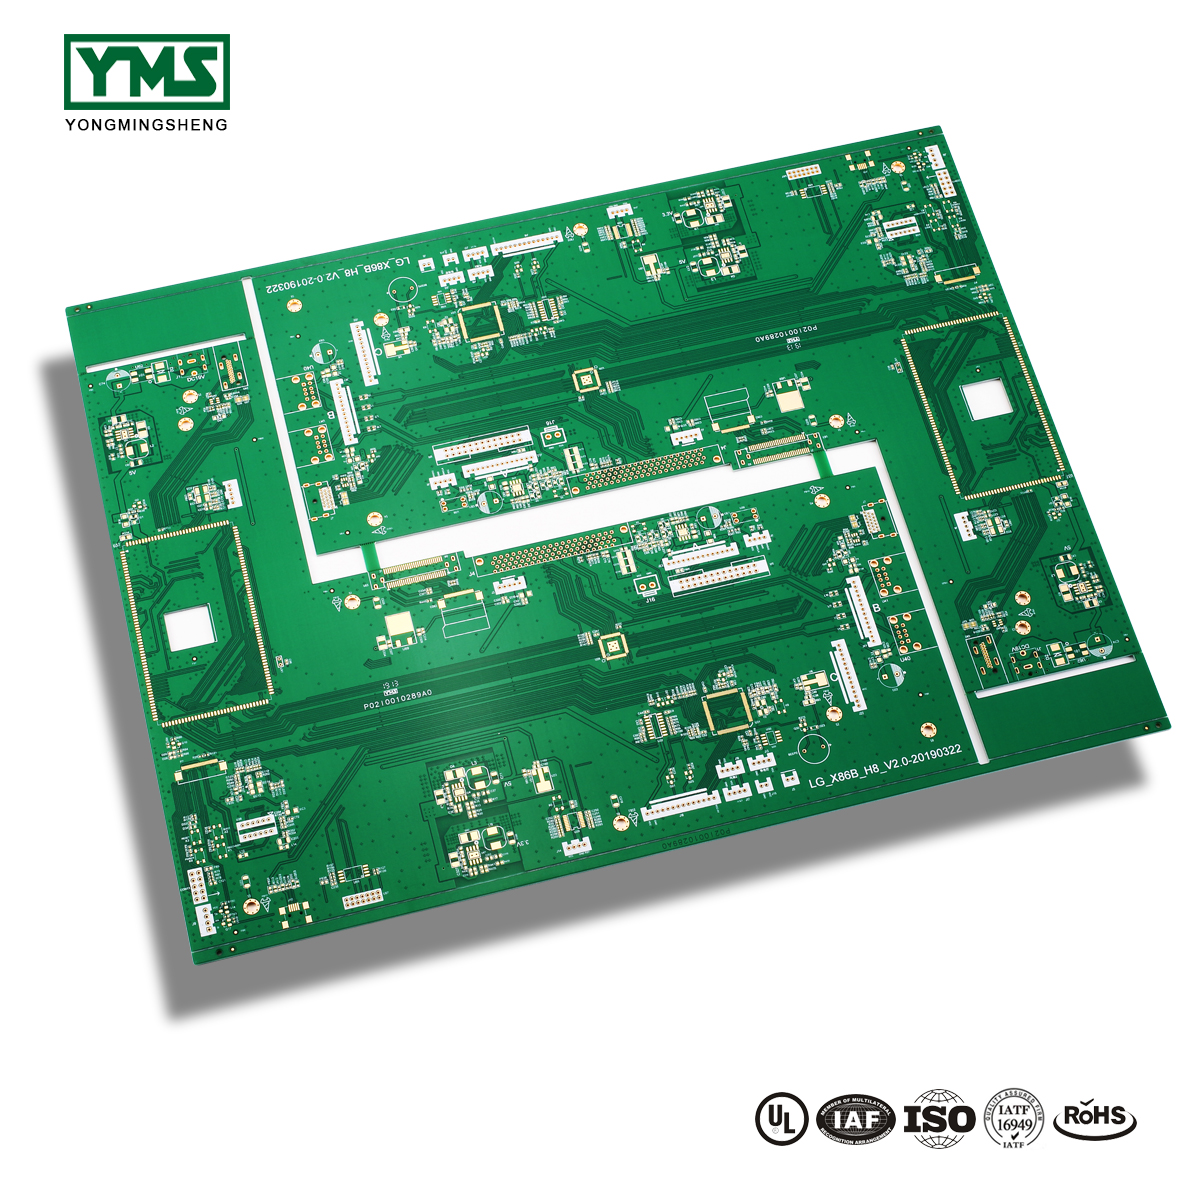 Hot sale Aluminum Skirting Base Board - Wholesale OEM Iso Certificated Electronic Assembly Assembled Printed Circuit Board (pcb) With Electronic Components – Yongmingsheng